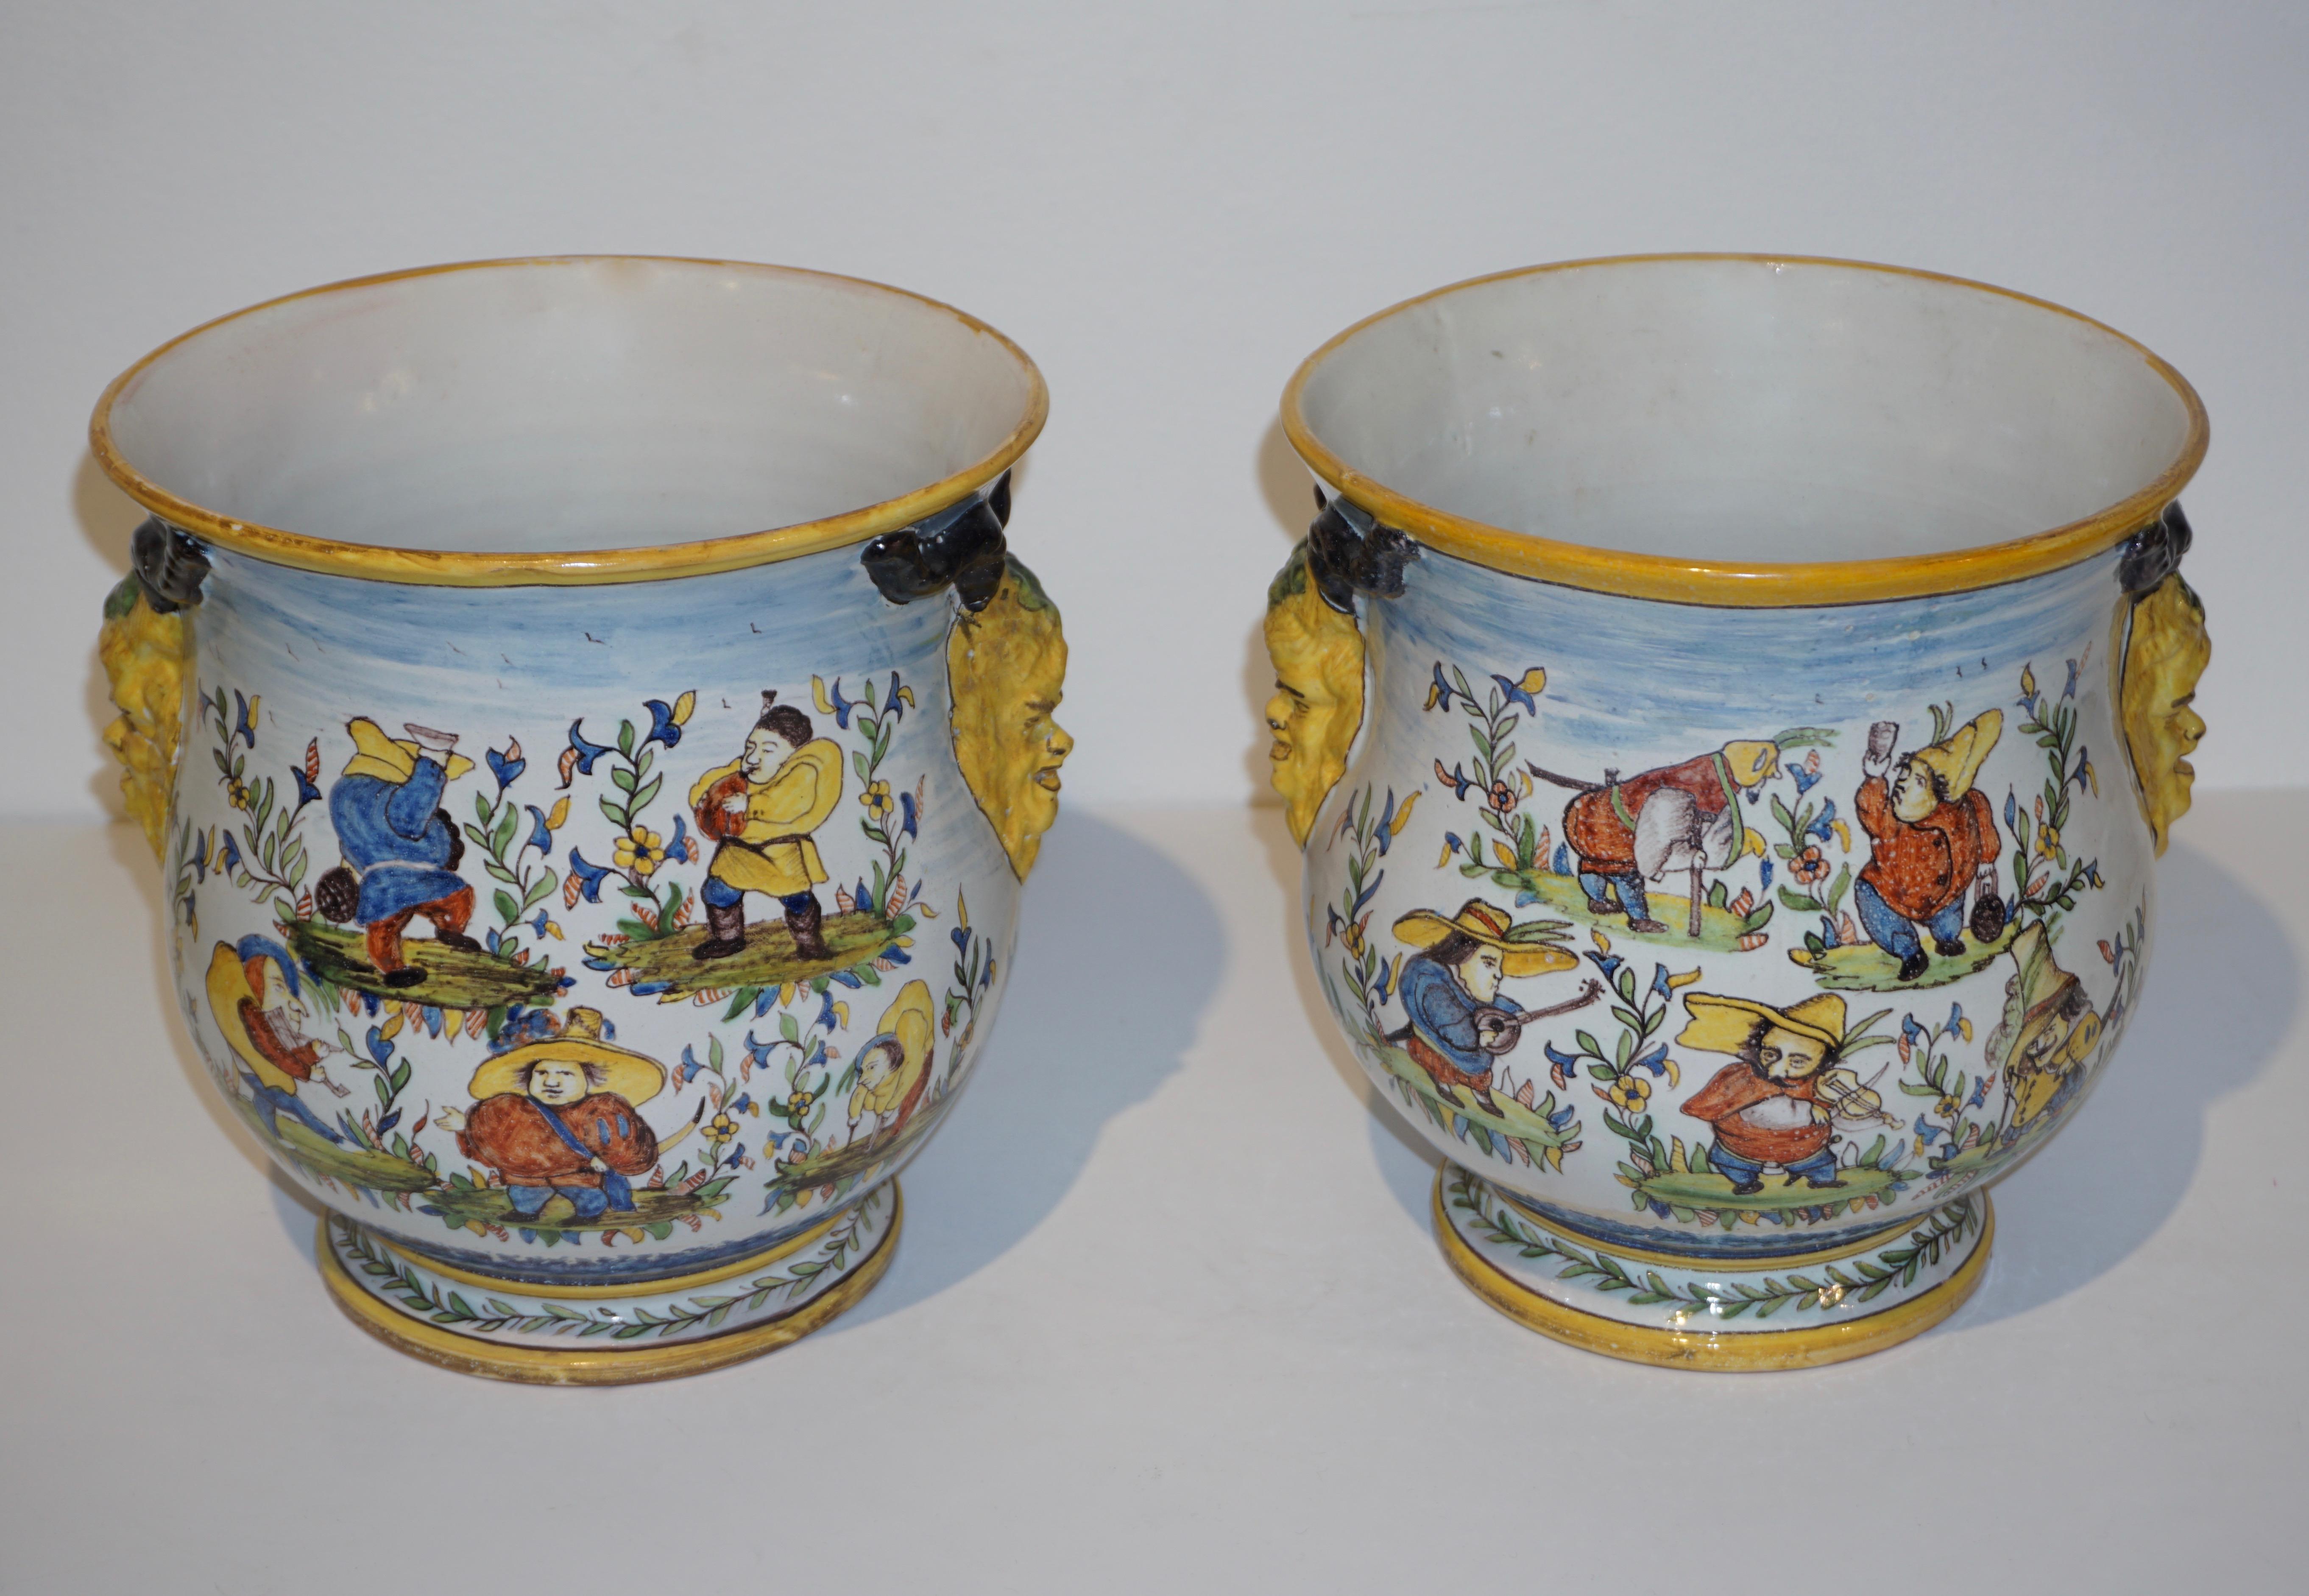 1872-1876, rare pair of fun French faience cachepots with provenance: the manoir 